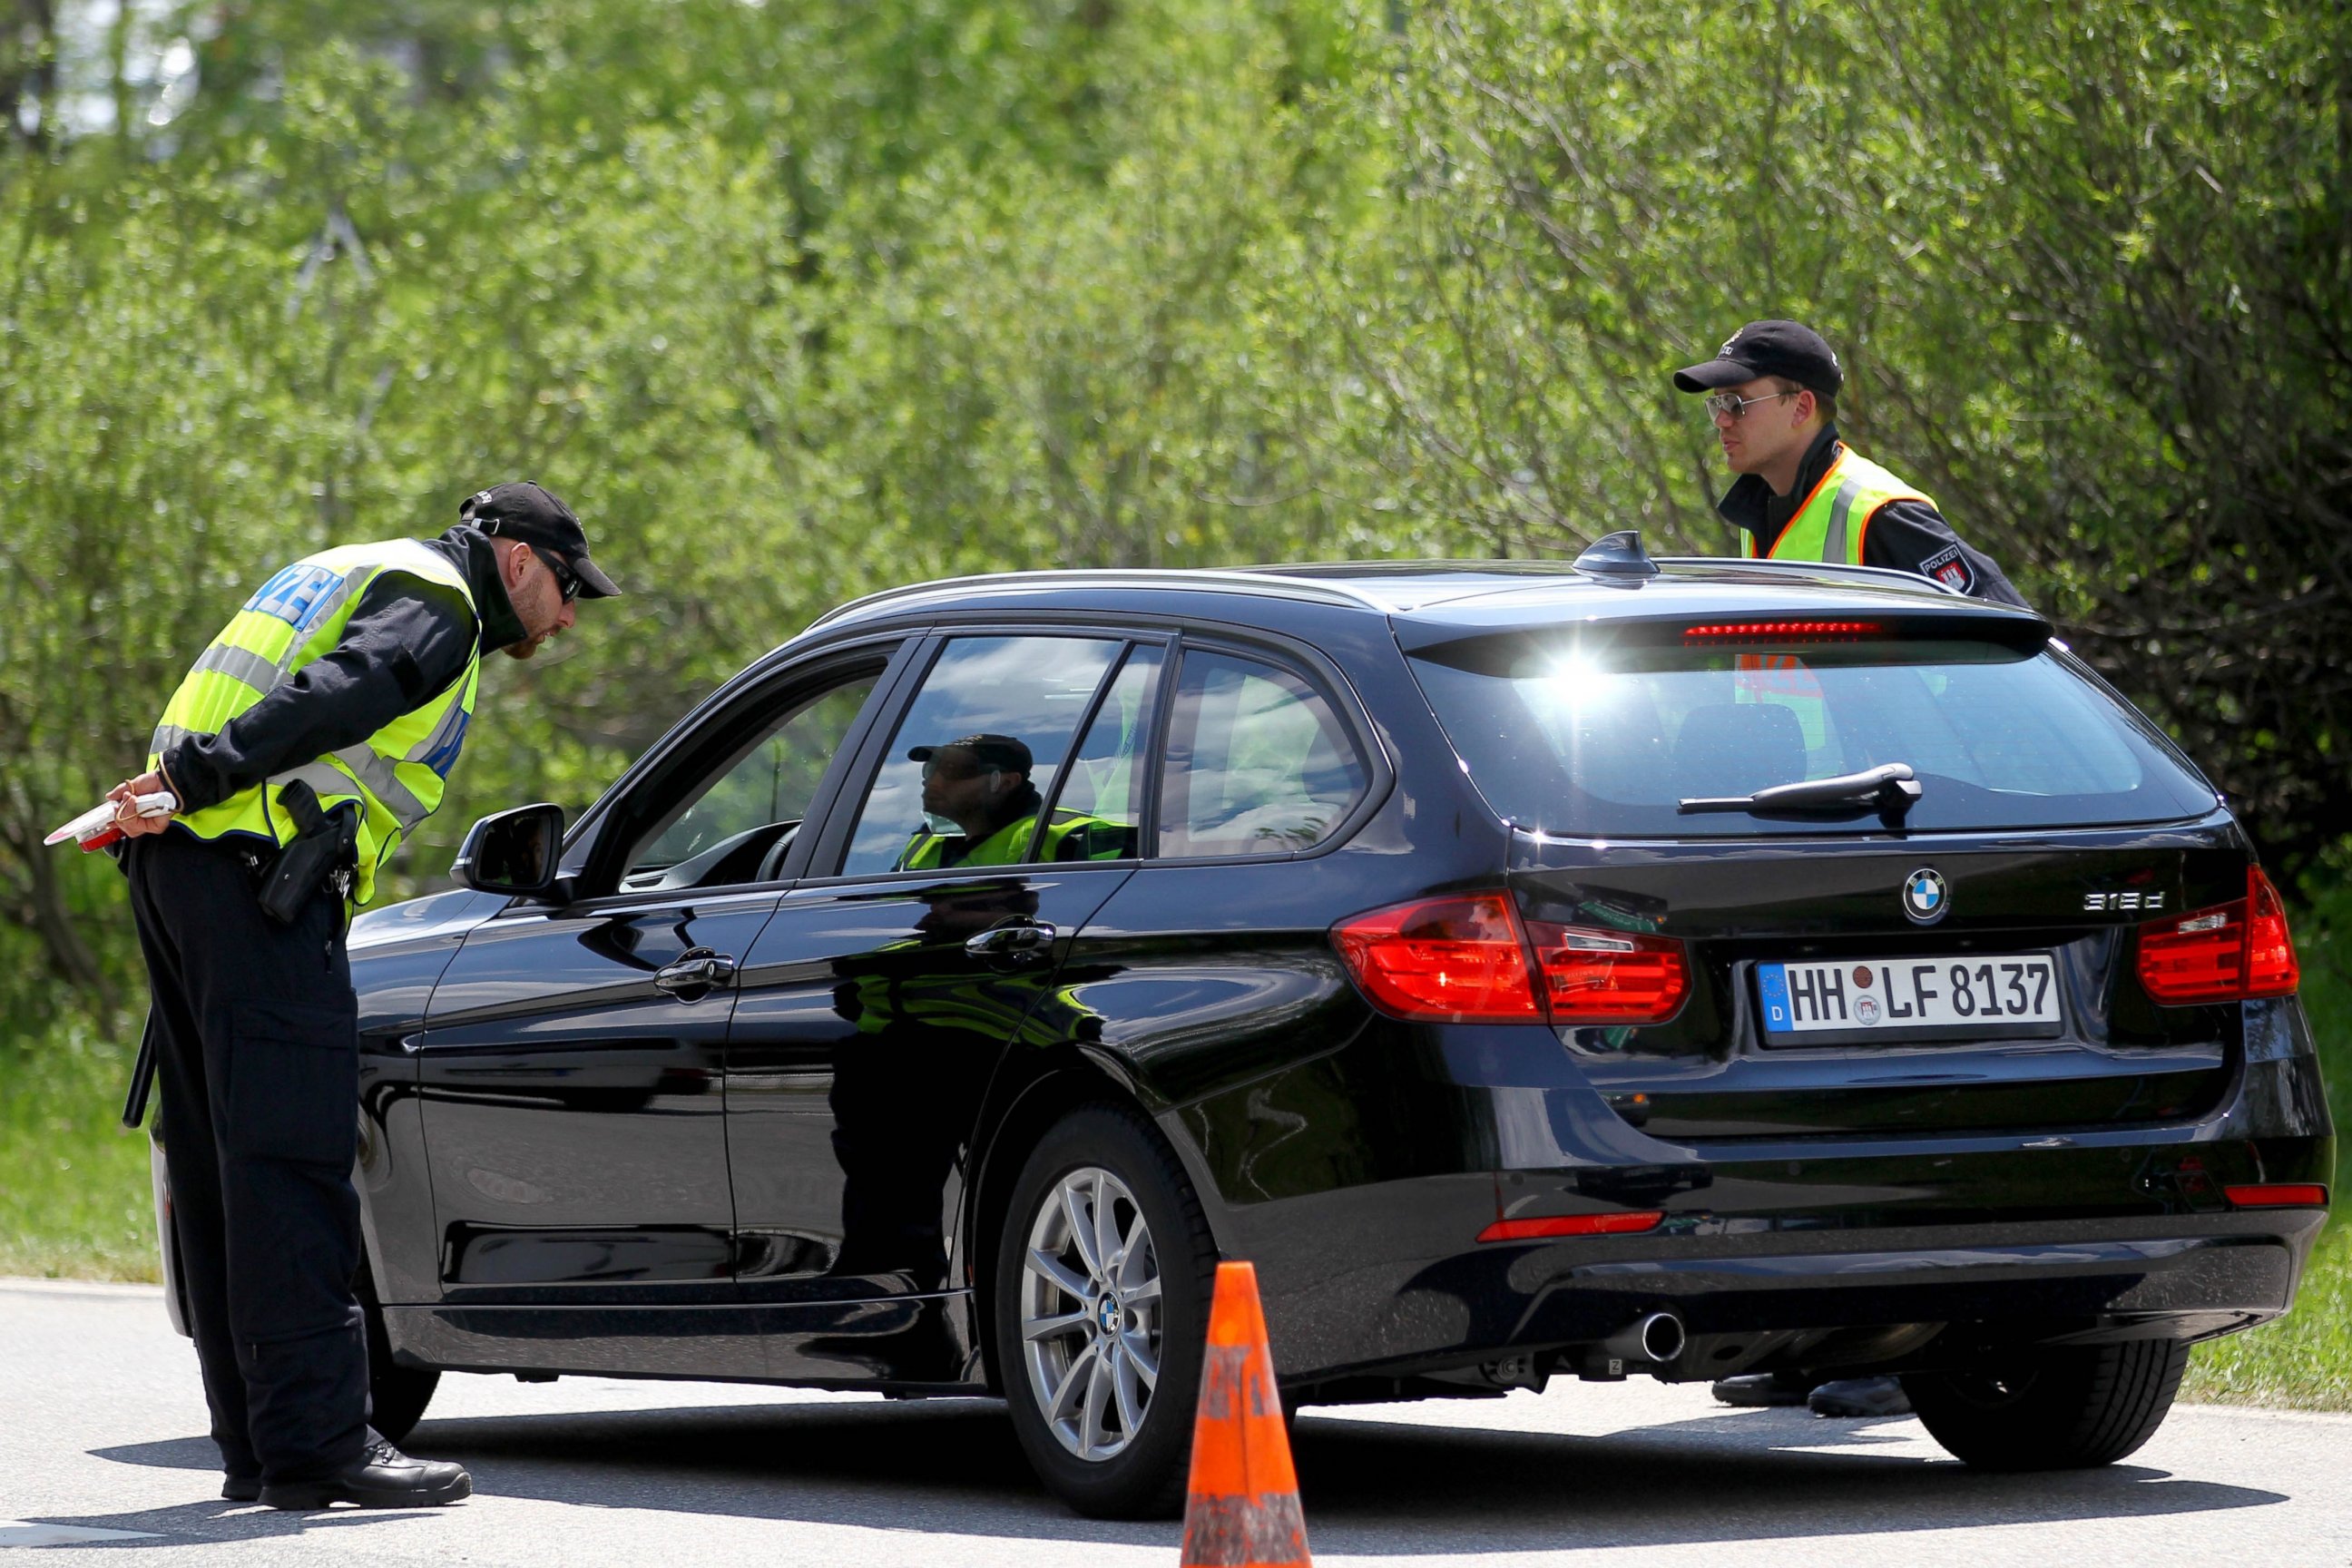 PHOTO: Police officers stop a car on a road a day before the G7 Summit in Krun, Germany on June 6, 2015. 